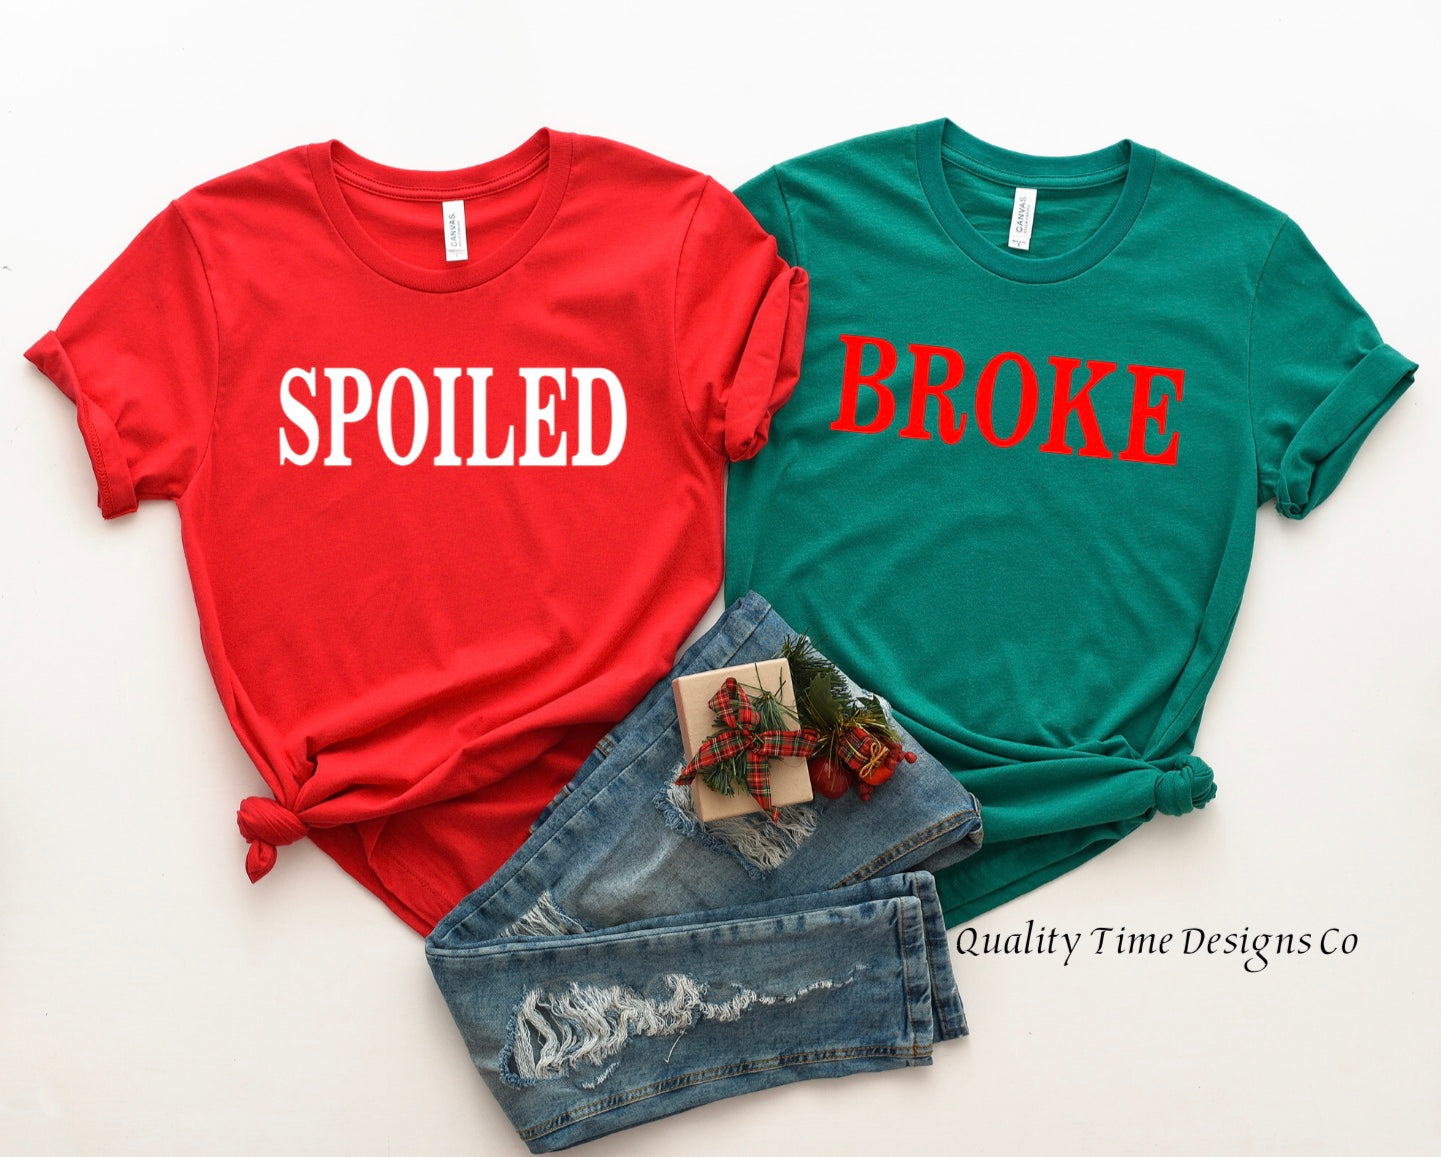 Spoiled and broke t-shirts